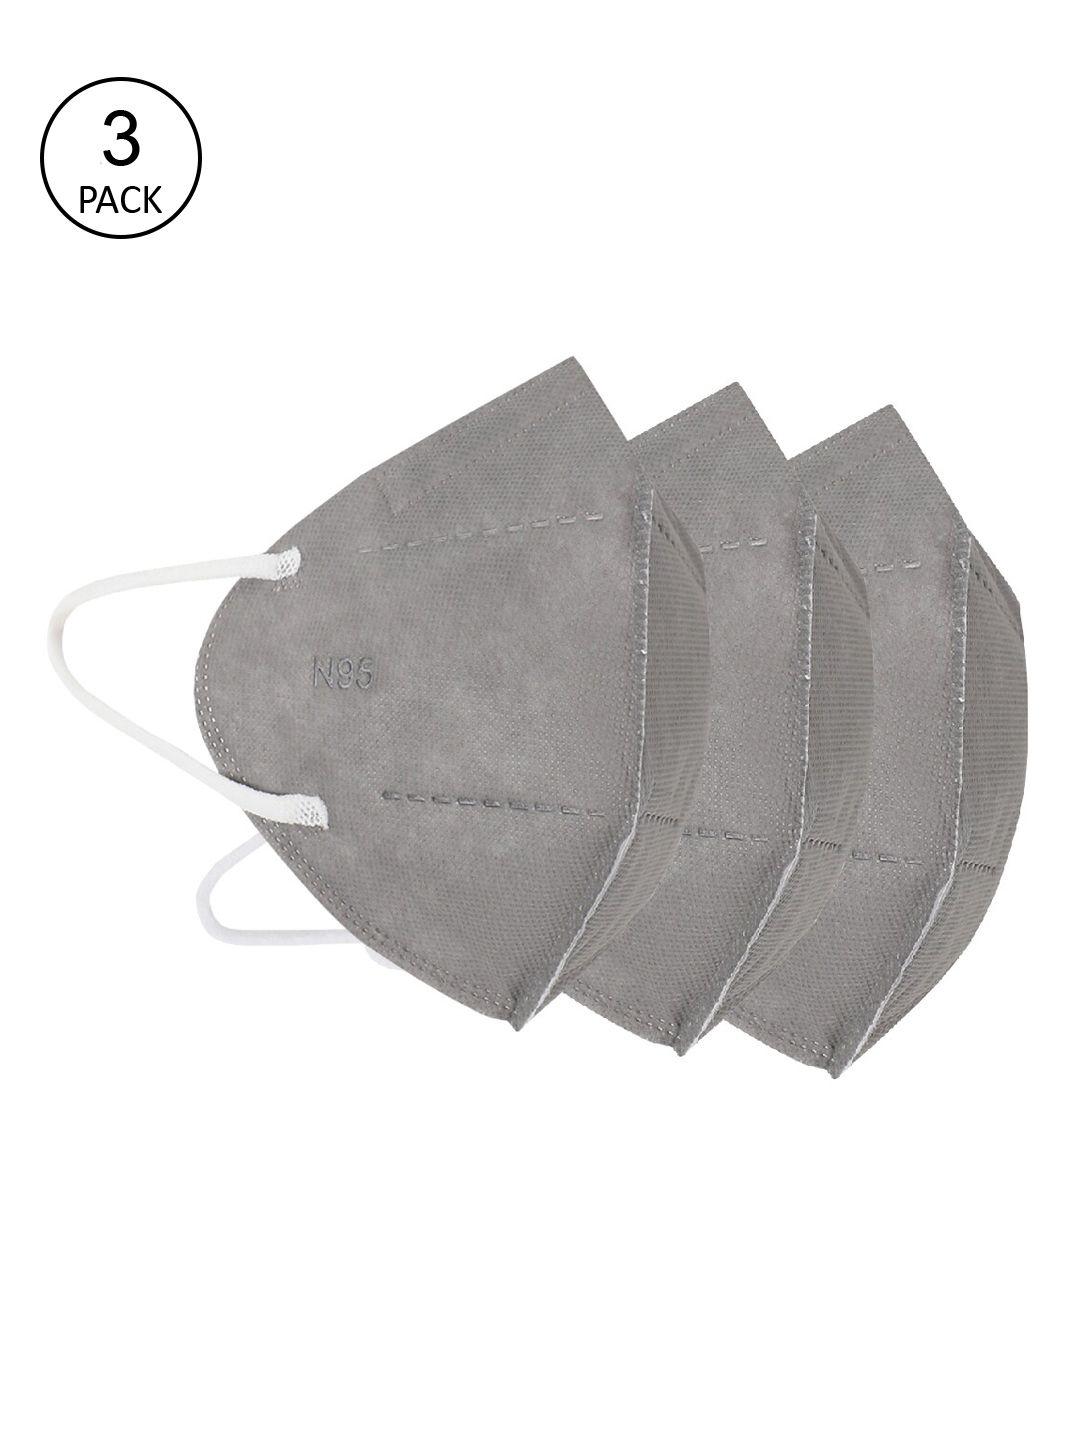 action-unisex-pack-of-3-grey-solid-5-ply-reusable-n95-masks